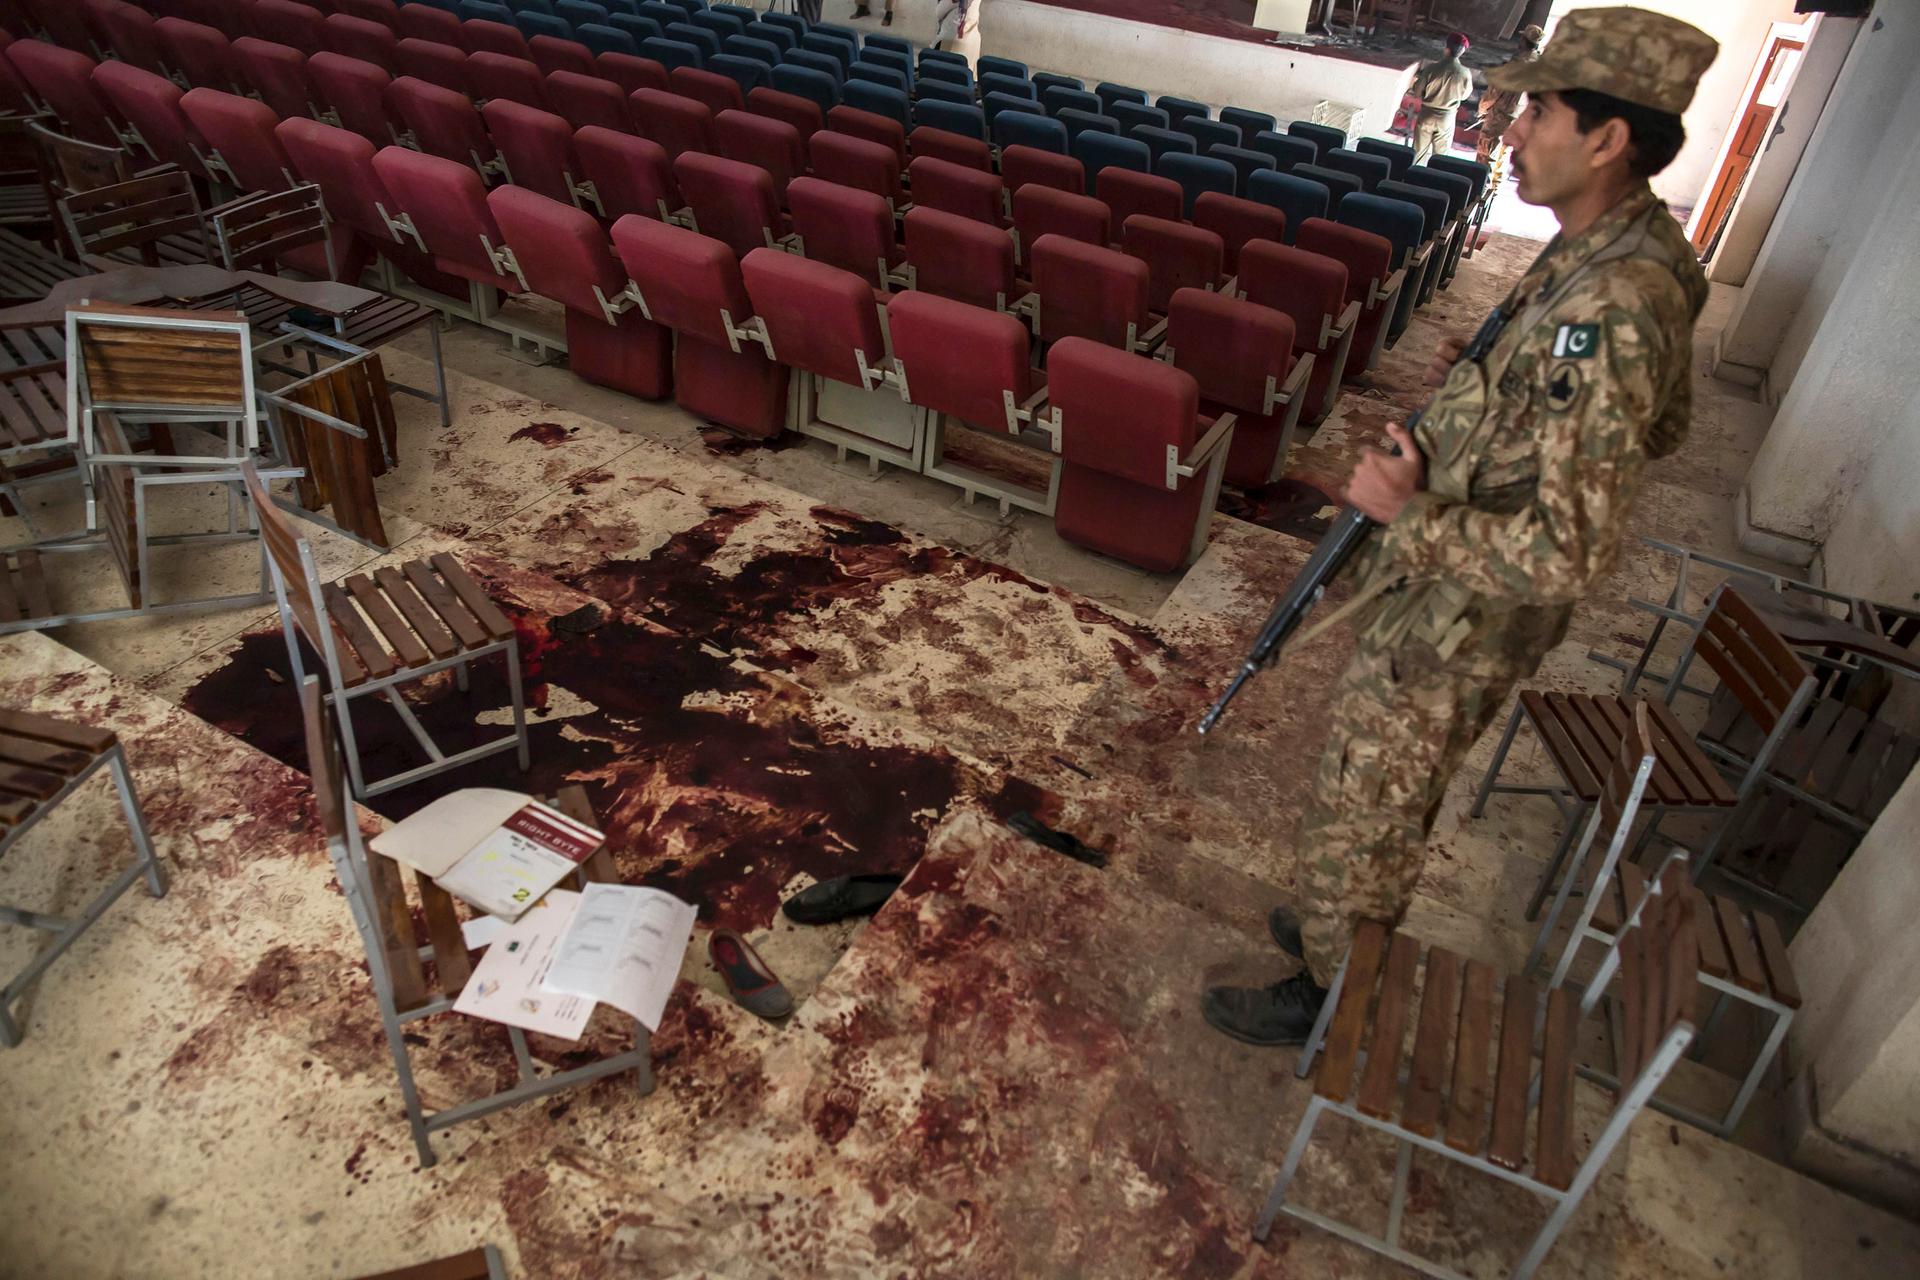 An army soldier stands by blood on the floor at the Army Public School, which was attacked by Taliban gunmen, in Peshawar on December 17, 2014.